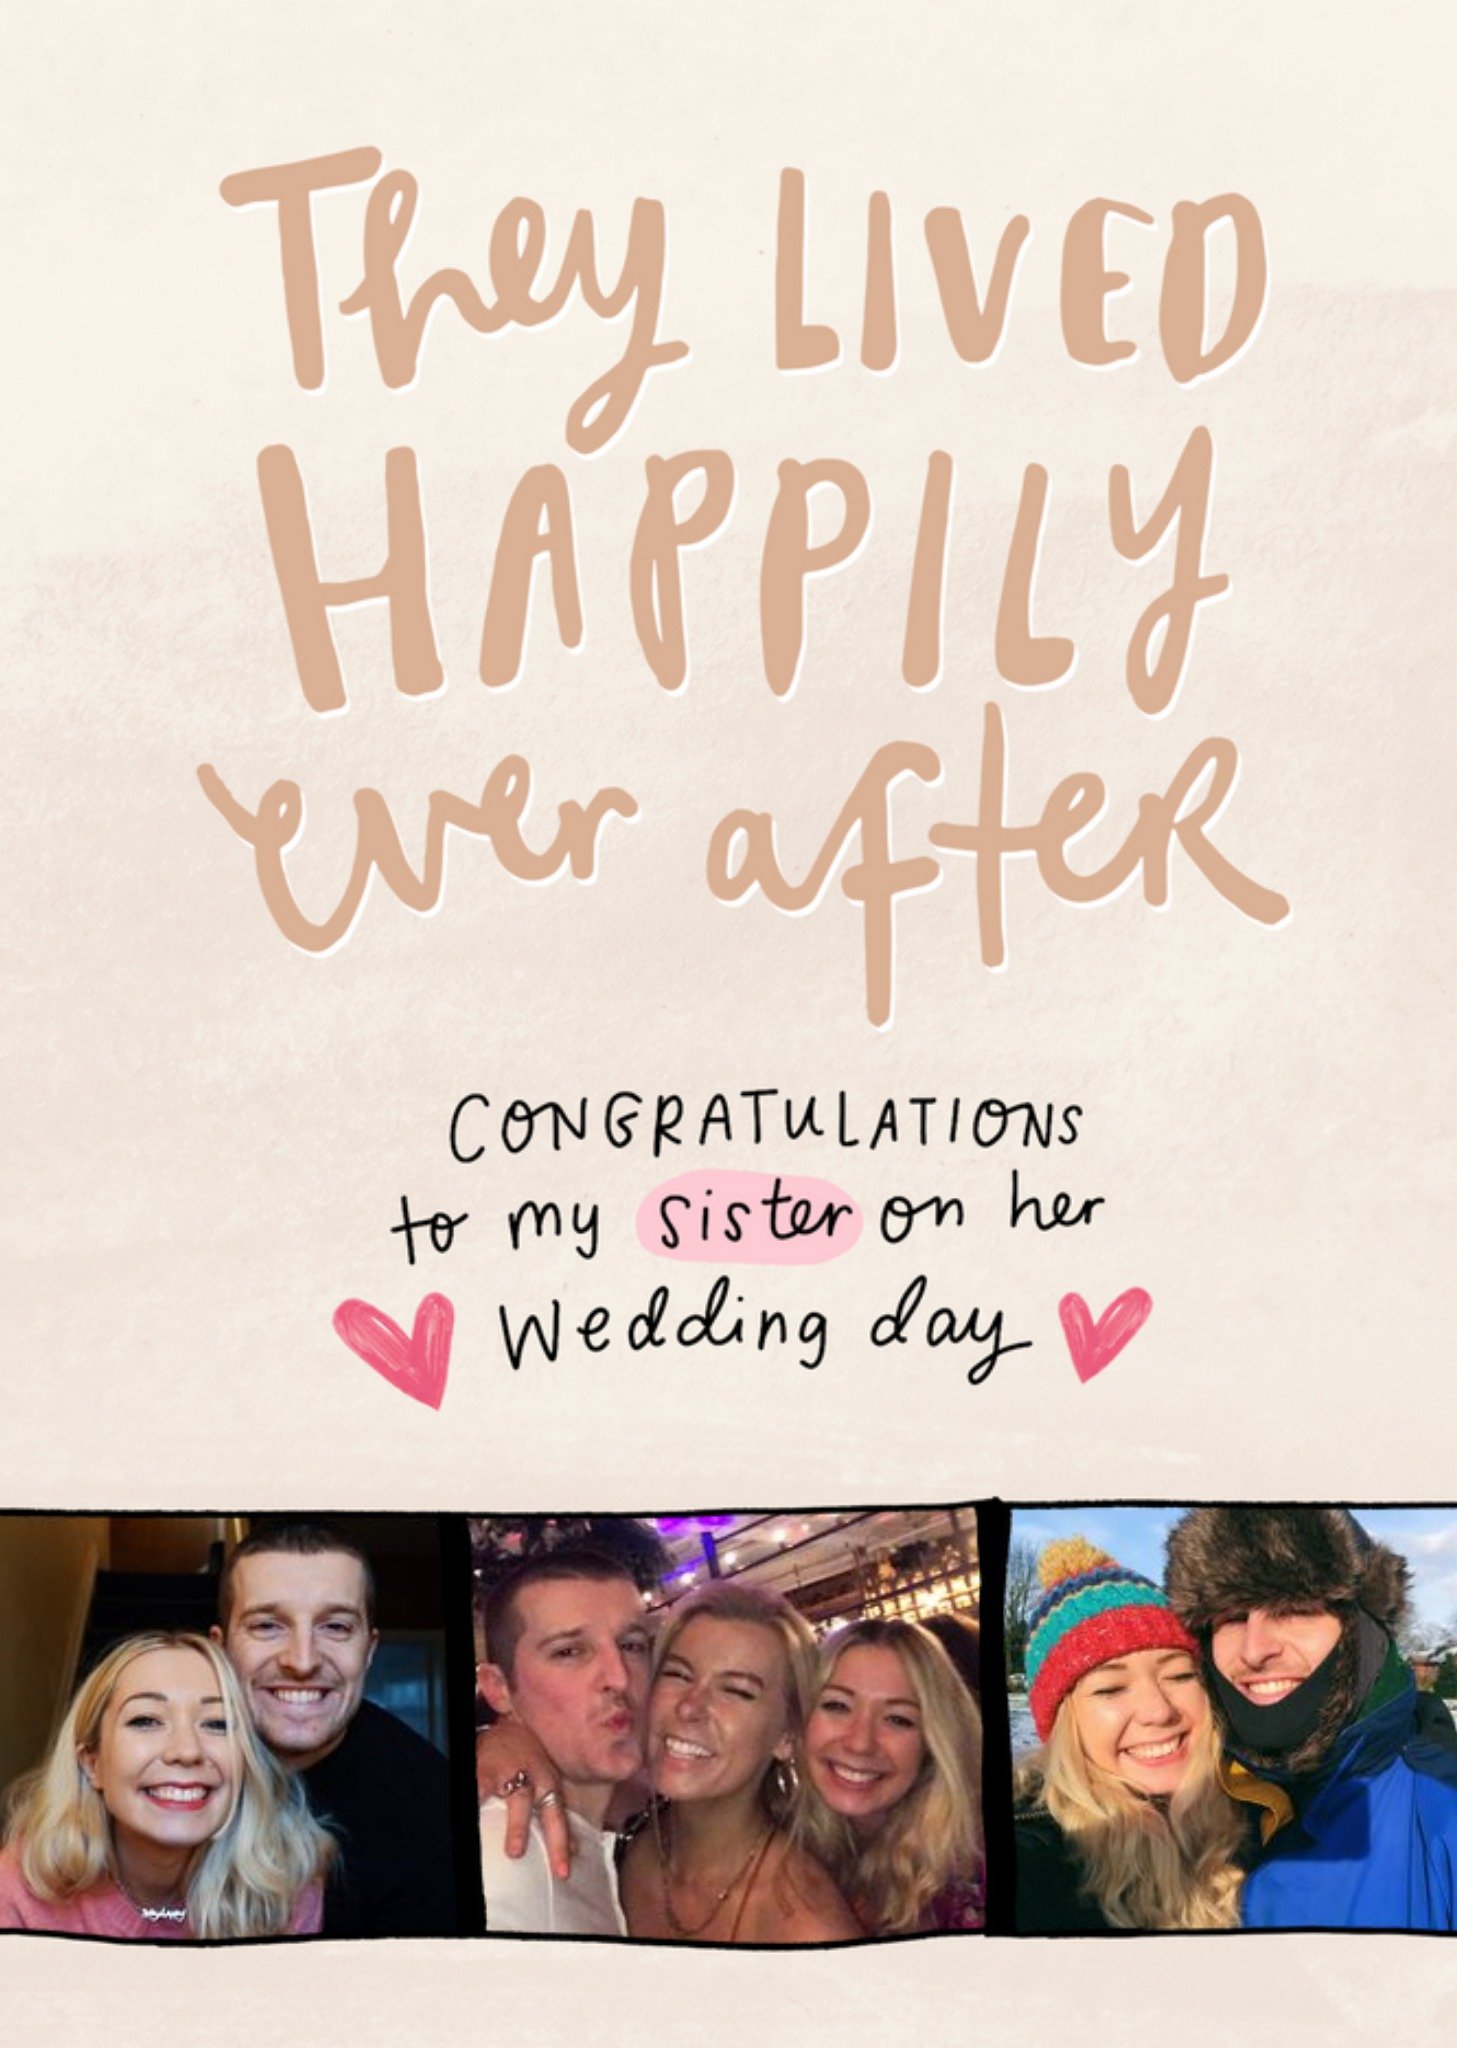 Moonpig The Happy News They Lived Happily Ever After Photo Upload Sister Wedding Day Card Ecard